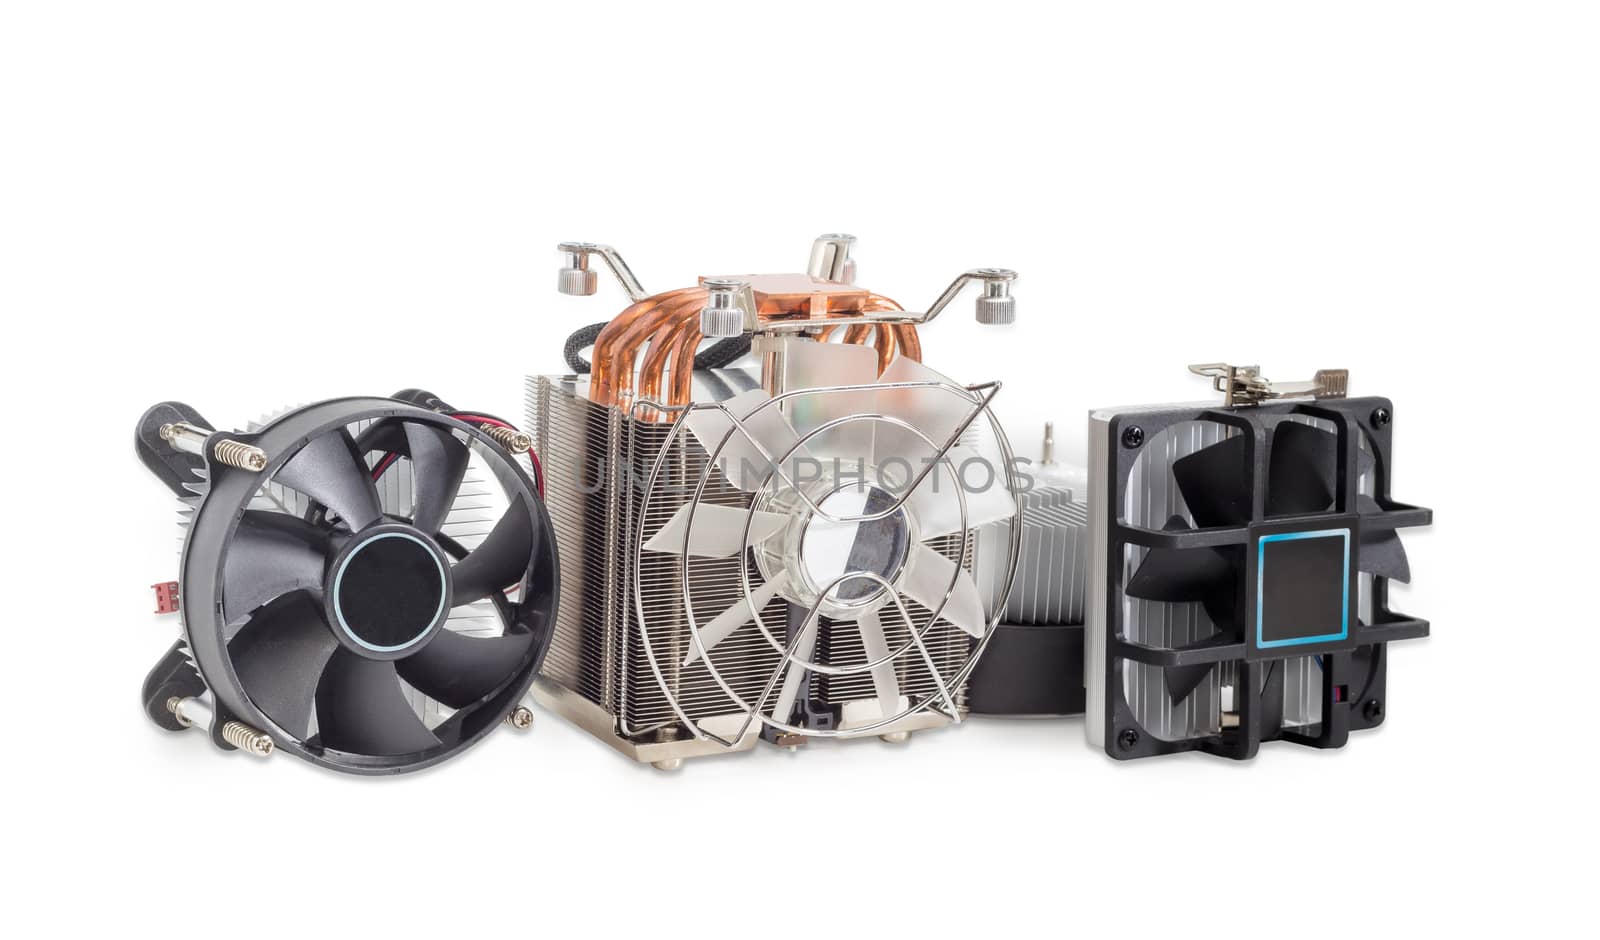 One active CPU cooler with a large finned heatsink, fan, copper thermal pad with heat pipes and several various CPU coolers with aluminum finned heatsinks and fans on a light background
